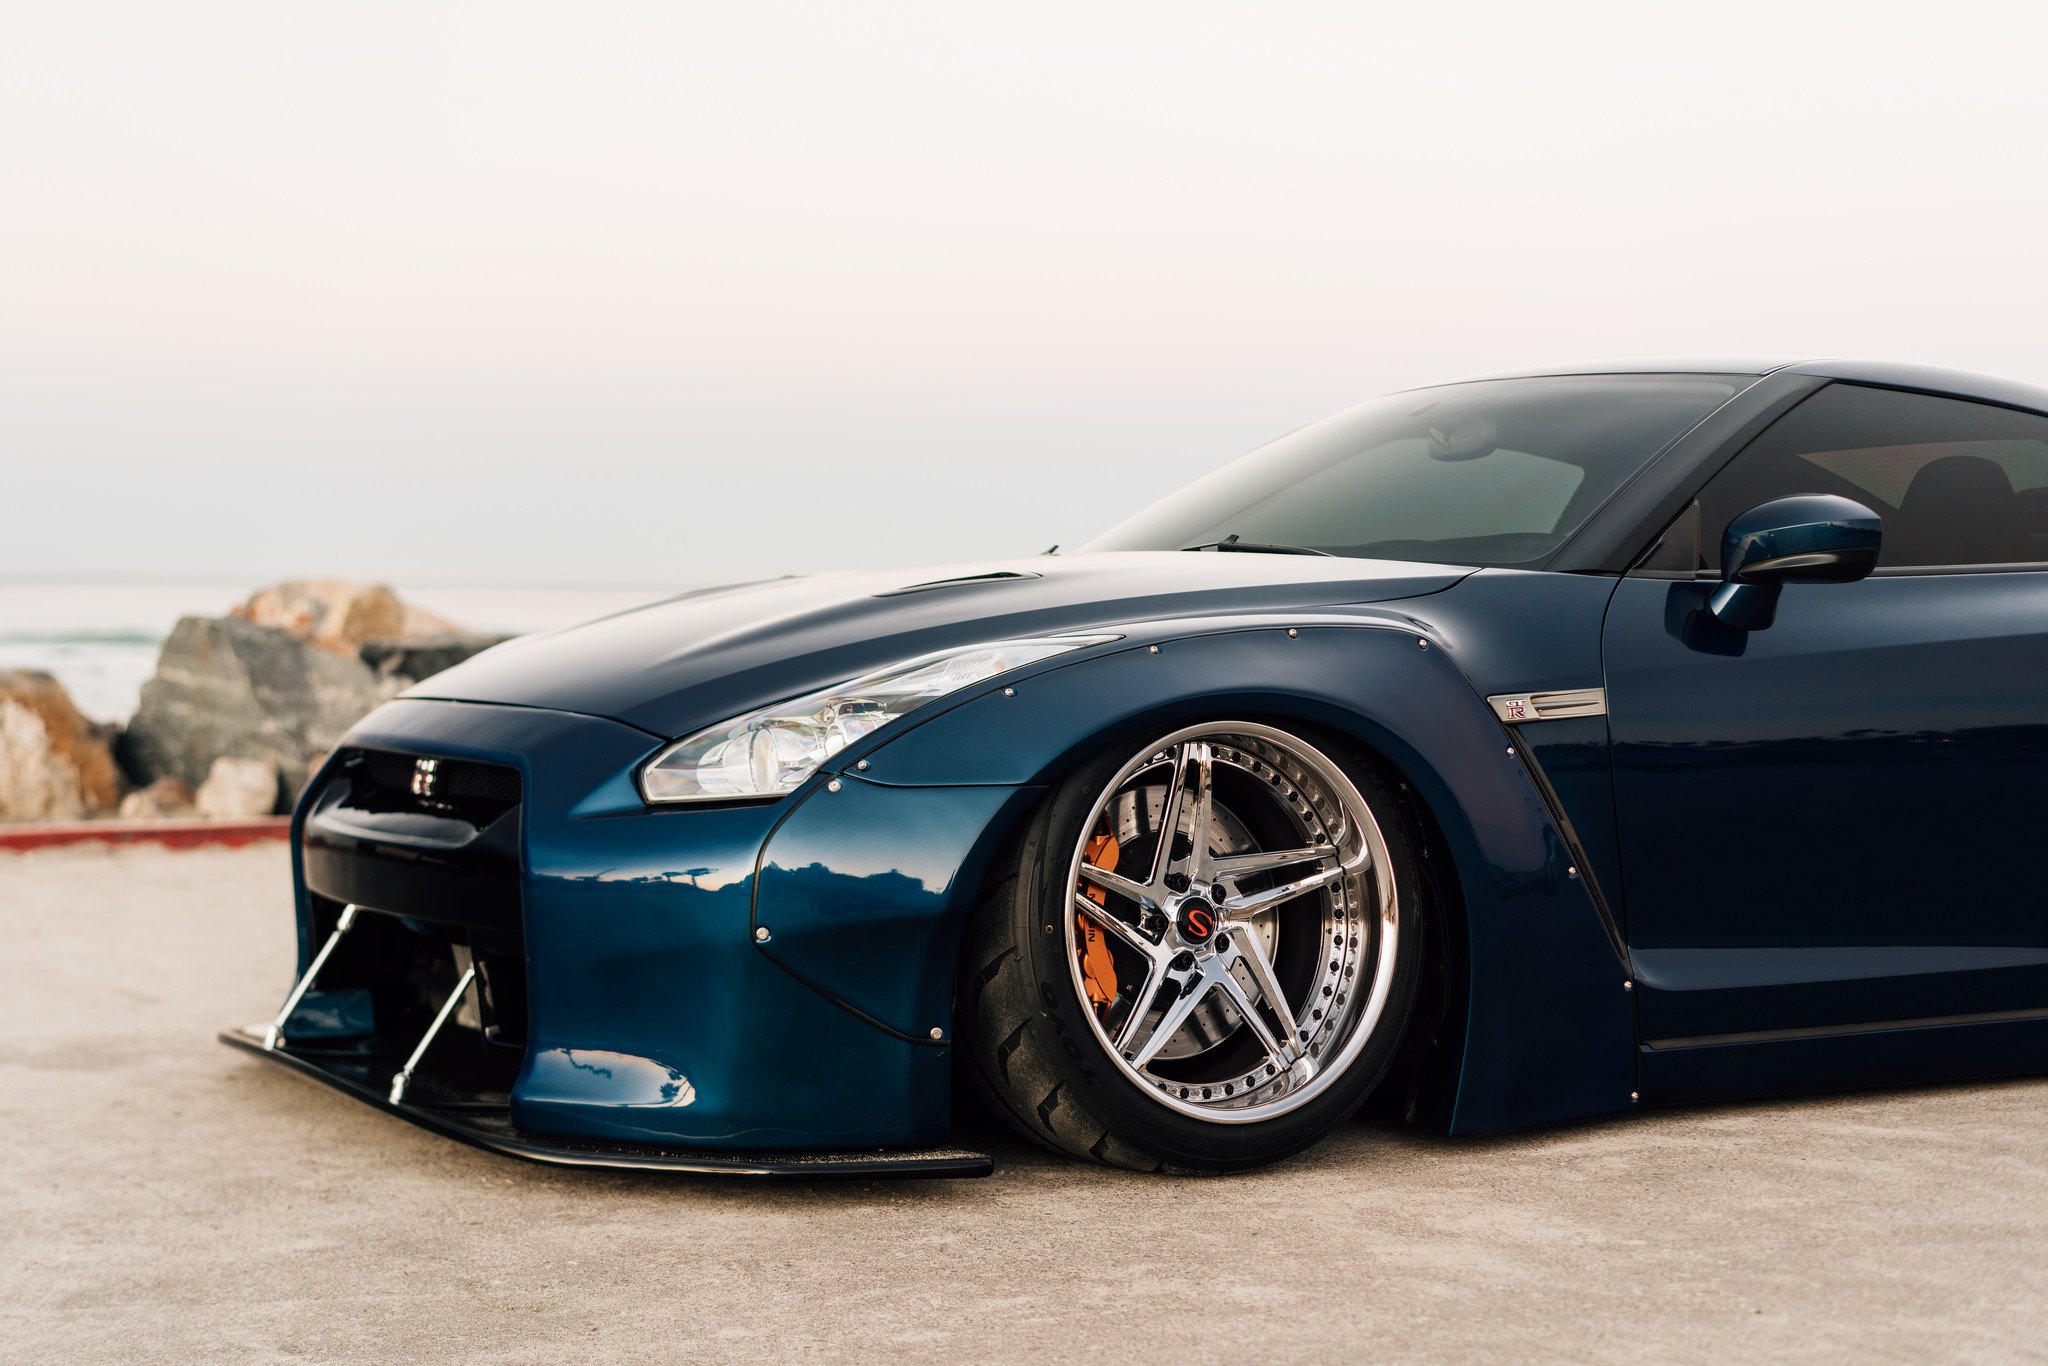 Dark Blue Nissan GT-R with Aftermarket Fender Flares - Photo by Zachary Lenfest